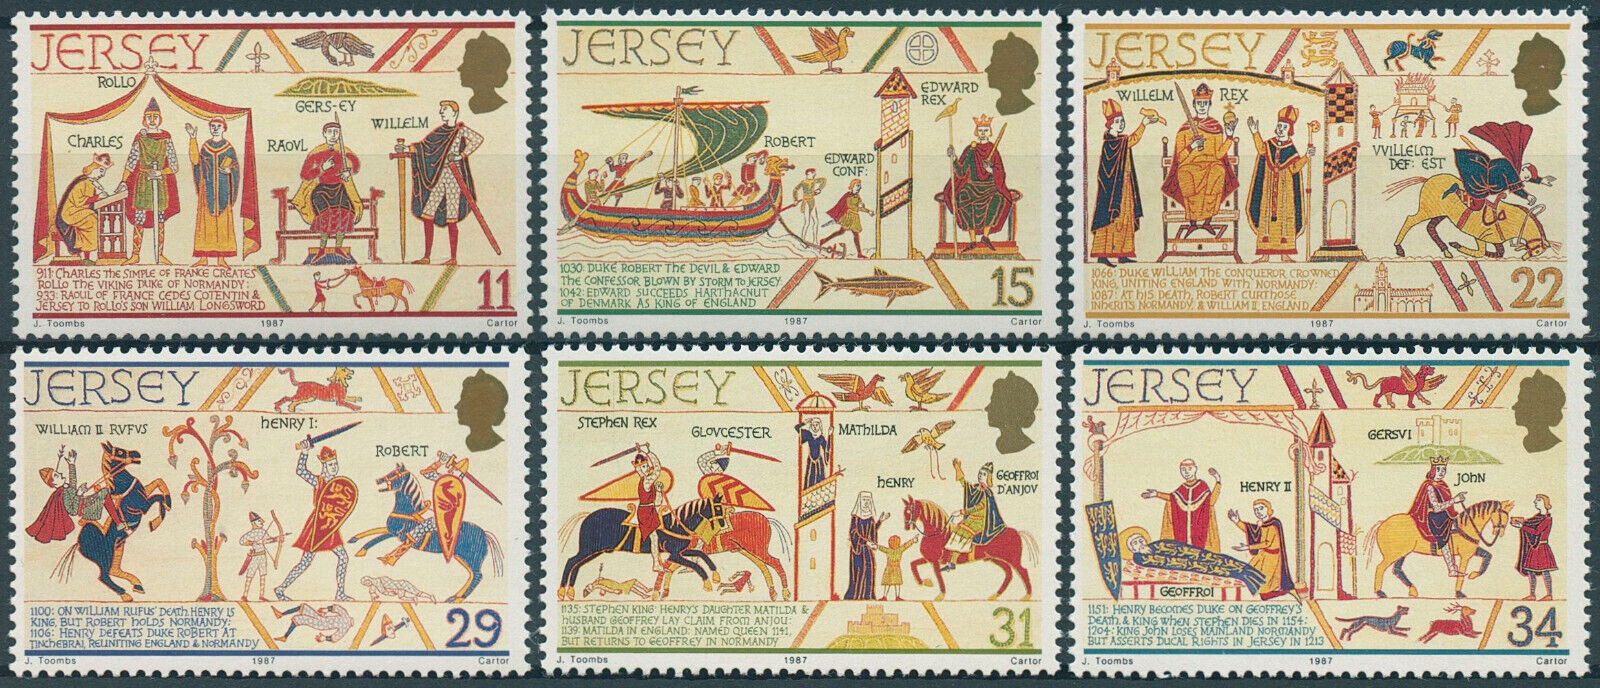 Jersey 1987 MNH Historical Figures Stamps William the Conqueror People 6v Set